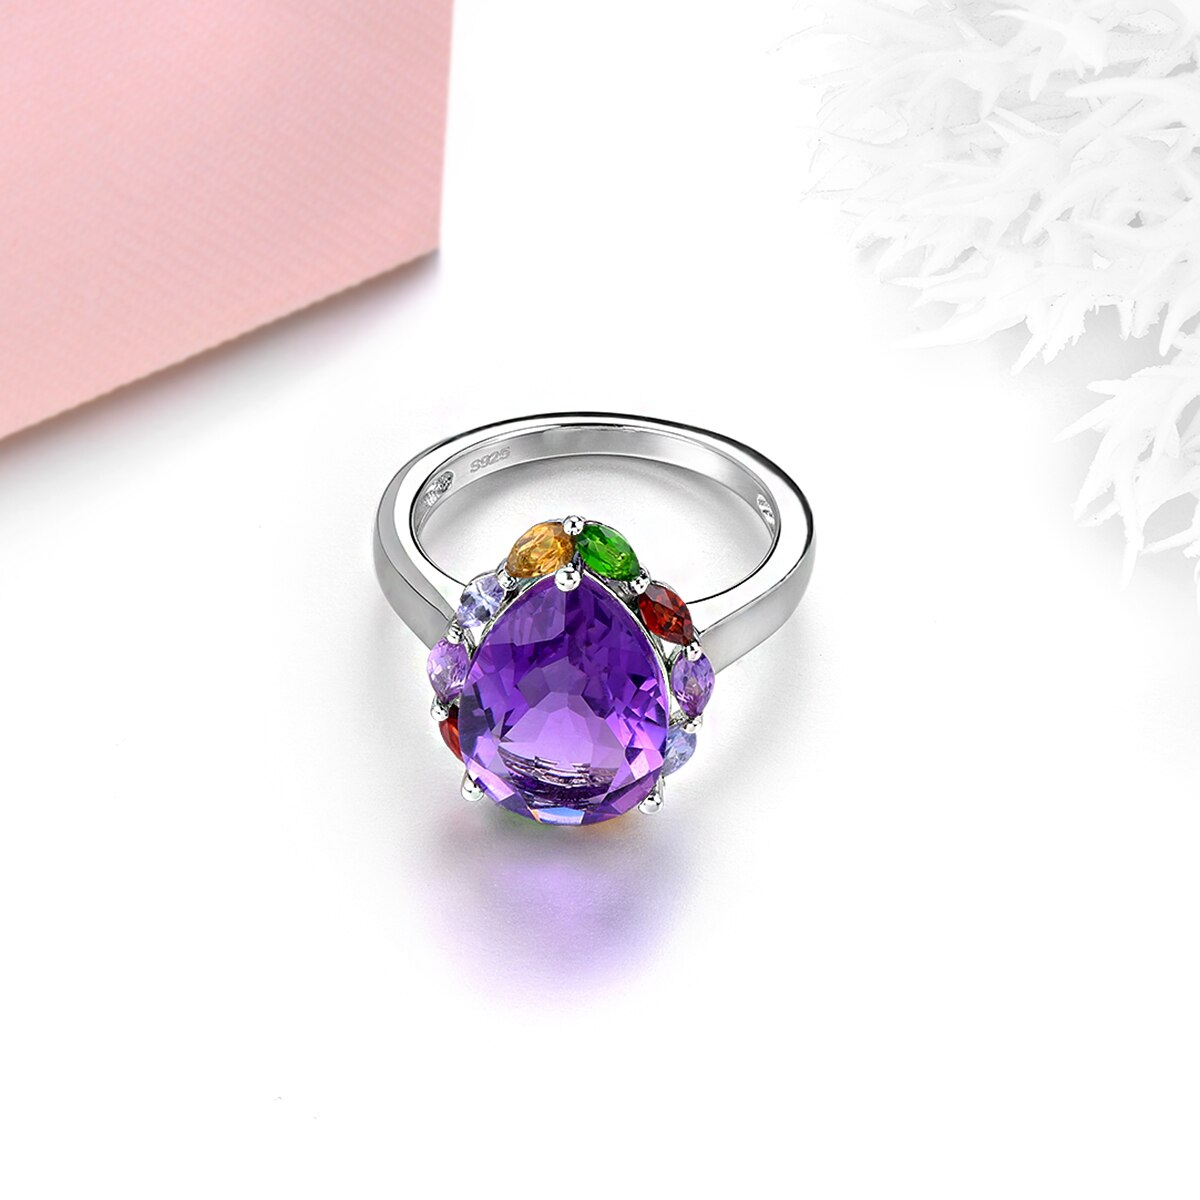 Natural Amethyst Solid Silver Ring 5.8 Carats Genuine Gemstone Diopside Garnet Multicolor Women Romantic Exquisite Style Jewelry